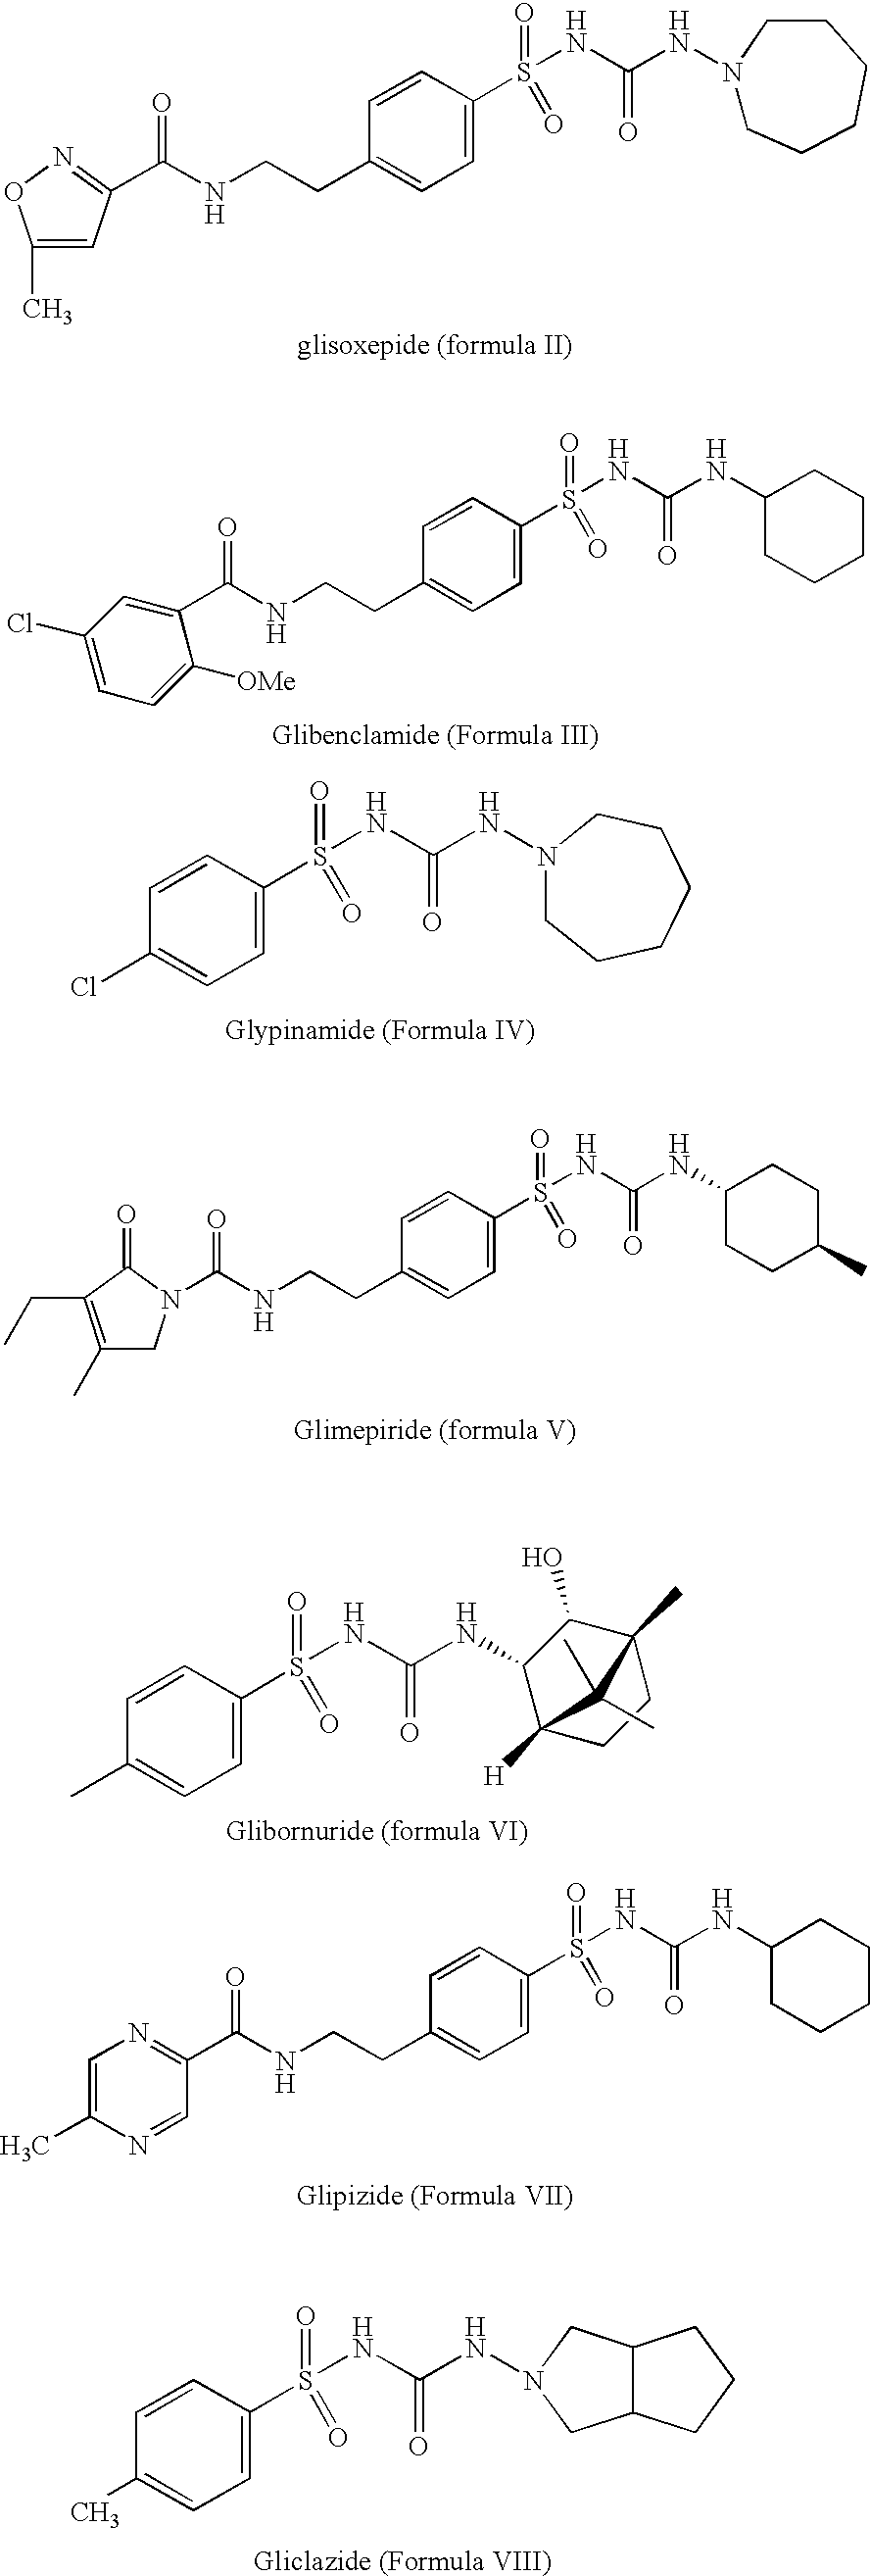 Method for manufacture of compounds related to the class of substituted sulfonyl urea anti-diabetics